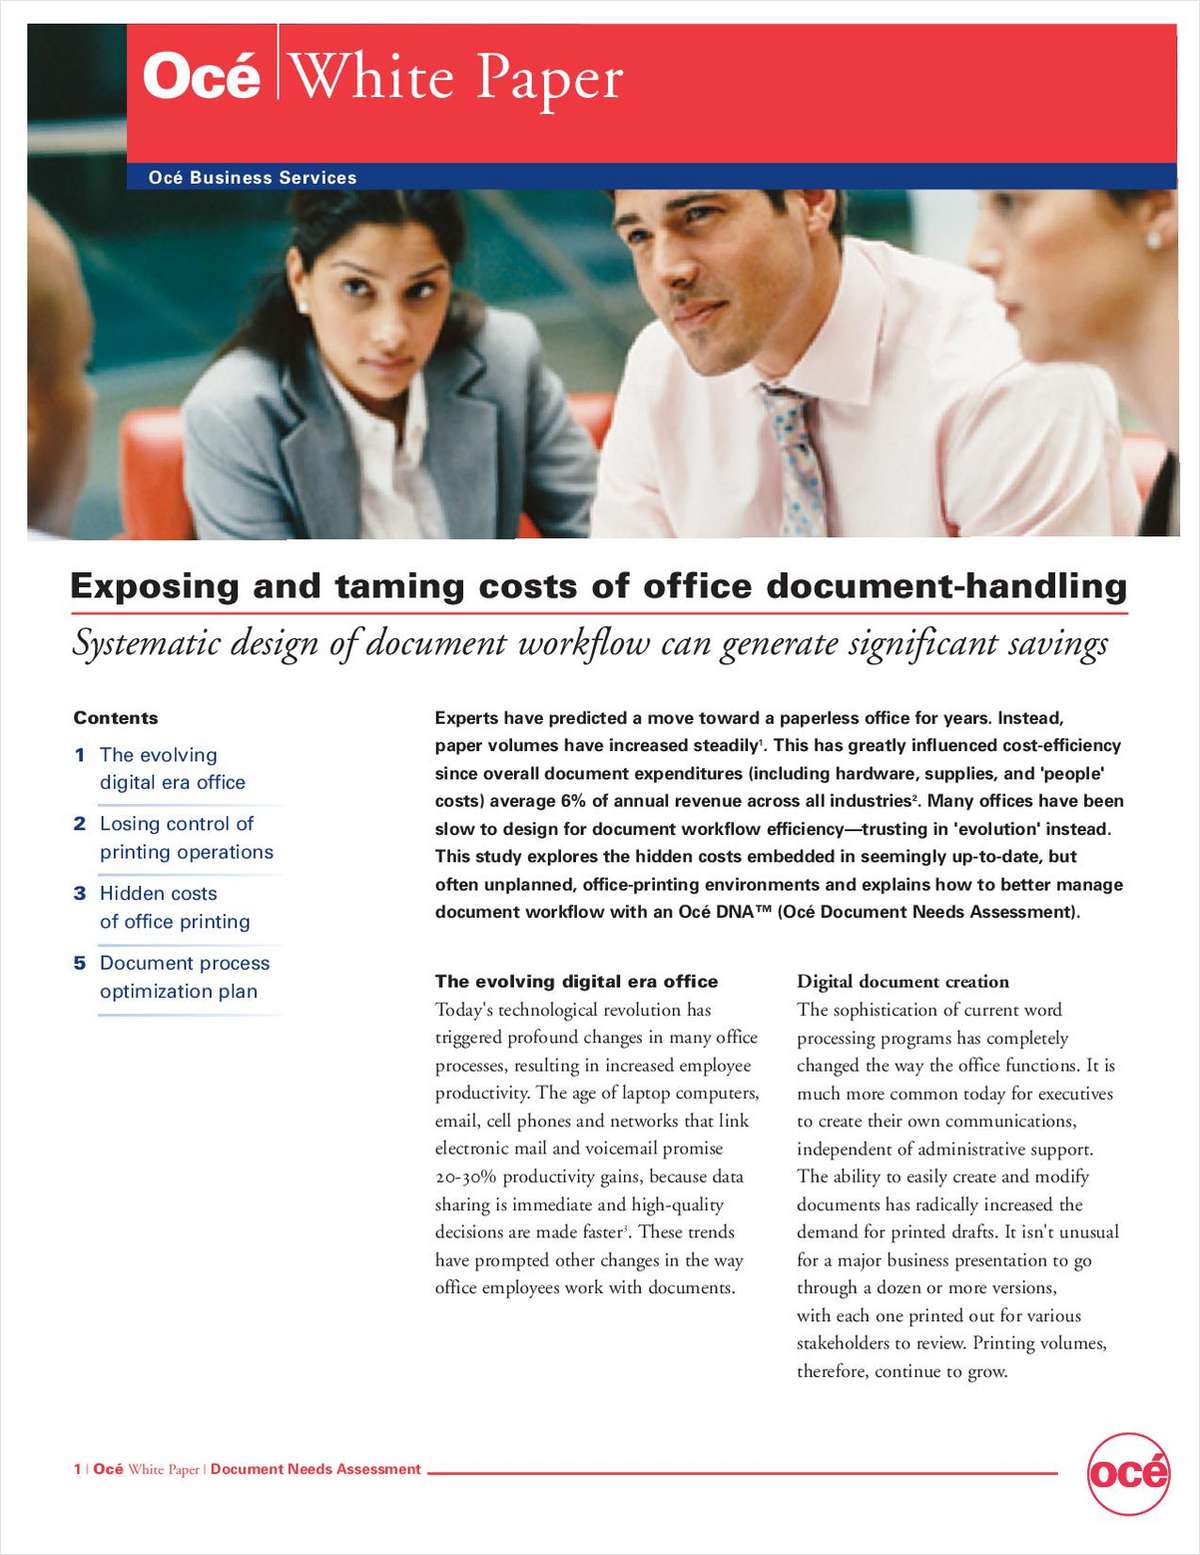 Exposing and Taming Costs of Office Document-Handling